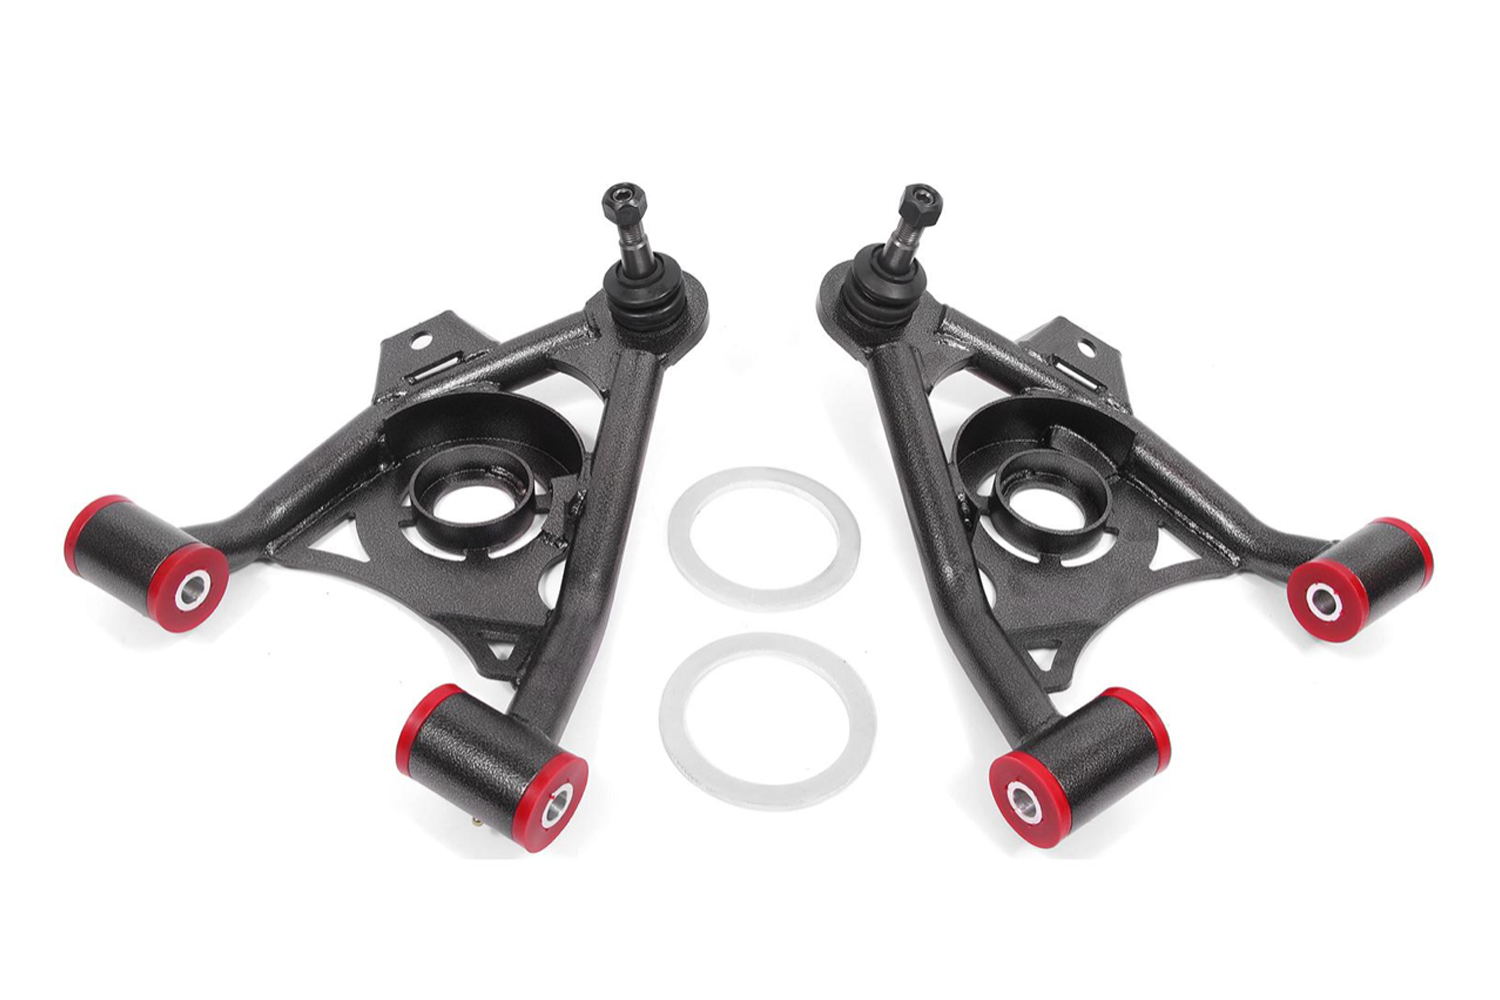 BMR Suspension AA037H Control Arm, Tubular, Lower, Ball Joints / Rod Ends, Steel, Black Powder Coat, Ford Mustang 1979-93, Pair